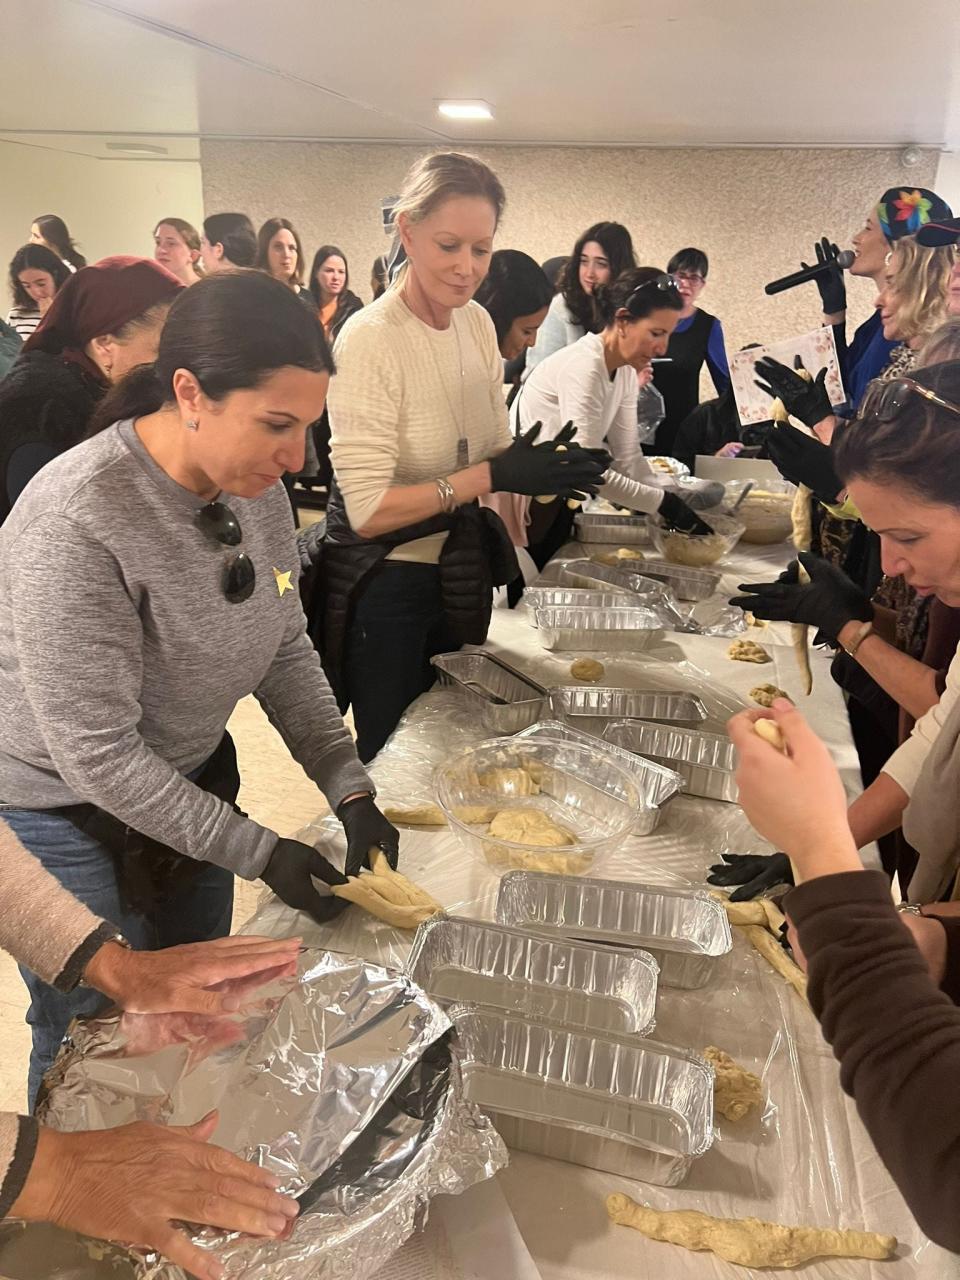 Women's Israel Mission participants attended a challah bake for women who were evacuated from their homes in southern Israel and are living temporarily in the Talbiya neighborhood in Jerusalem.